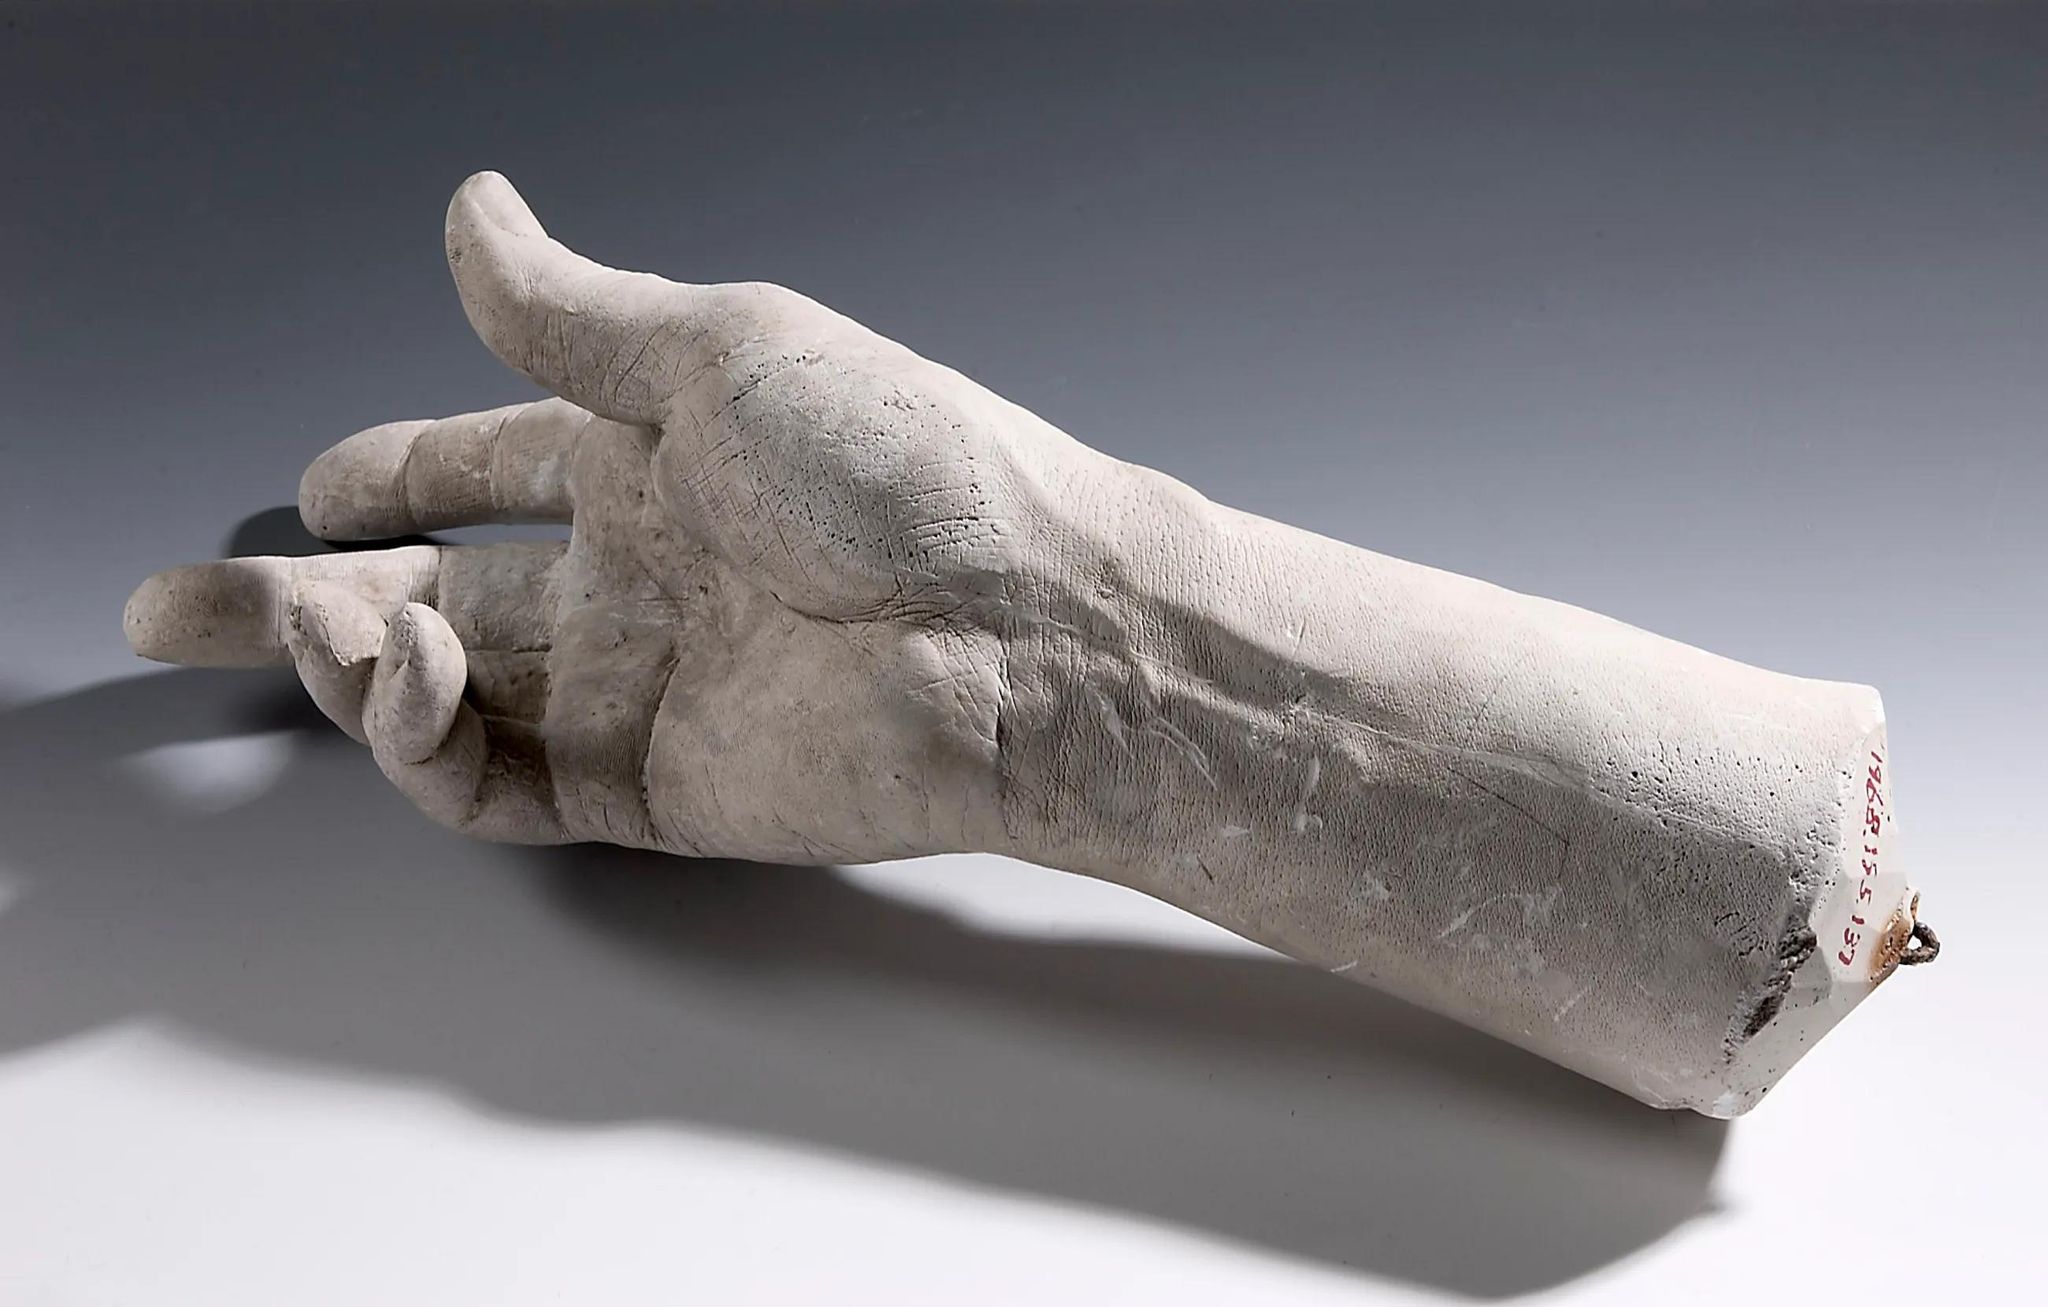 Cast of the Right Hand and Wrist of Hiram Powers